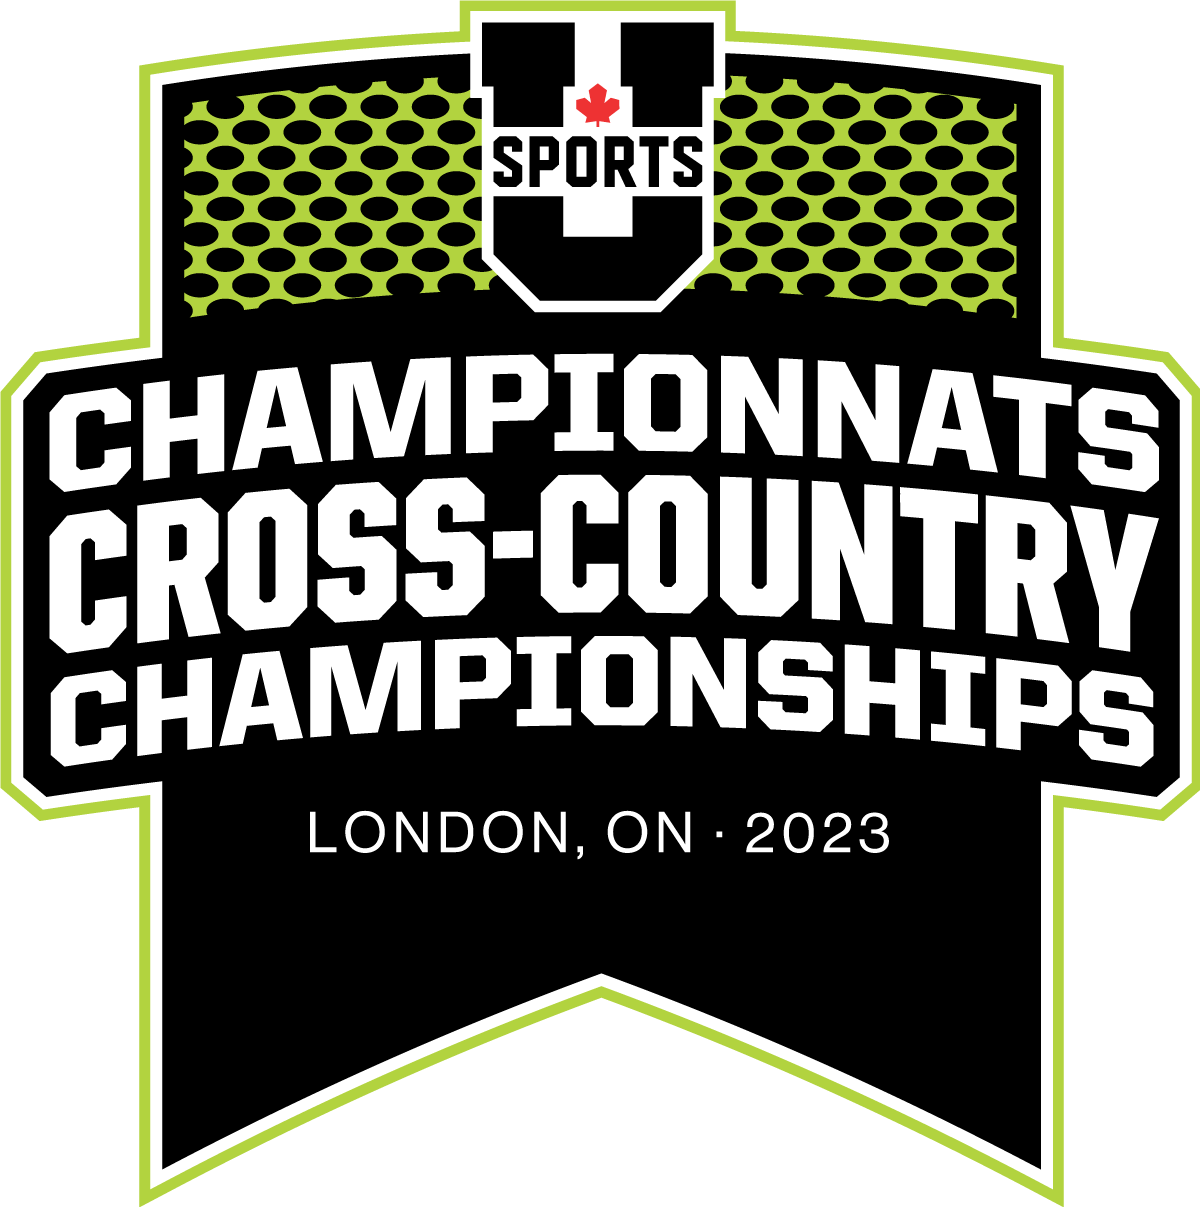 USports_Champ2324_crossCountry_Primary_CMYK_BL.png (90 KB)